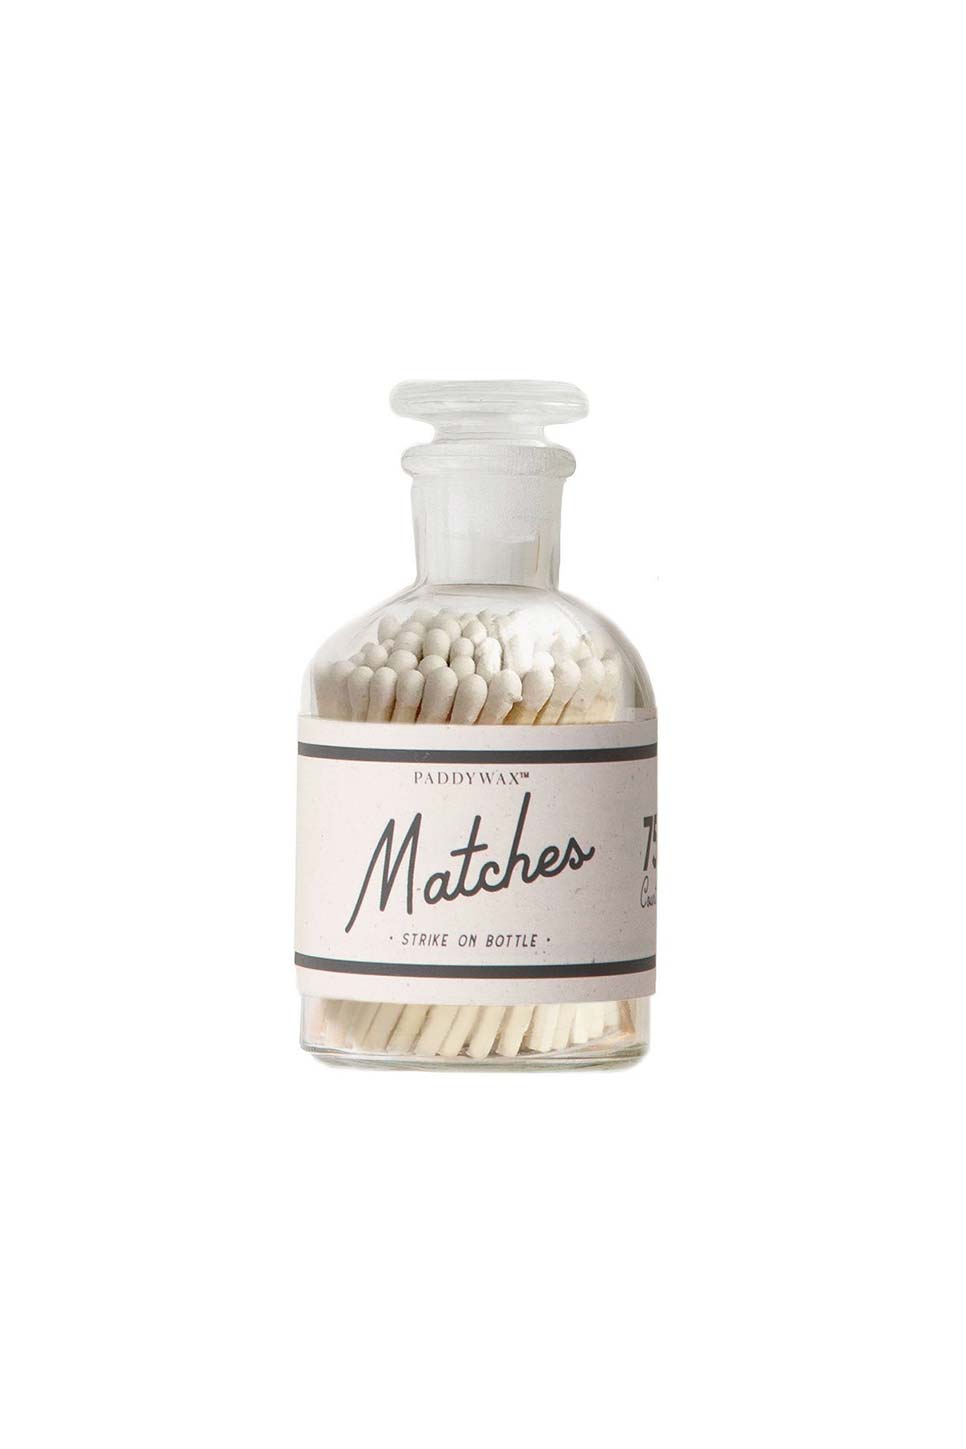 Paddywax - Bottle of Matches - White